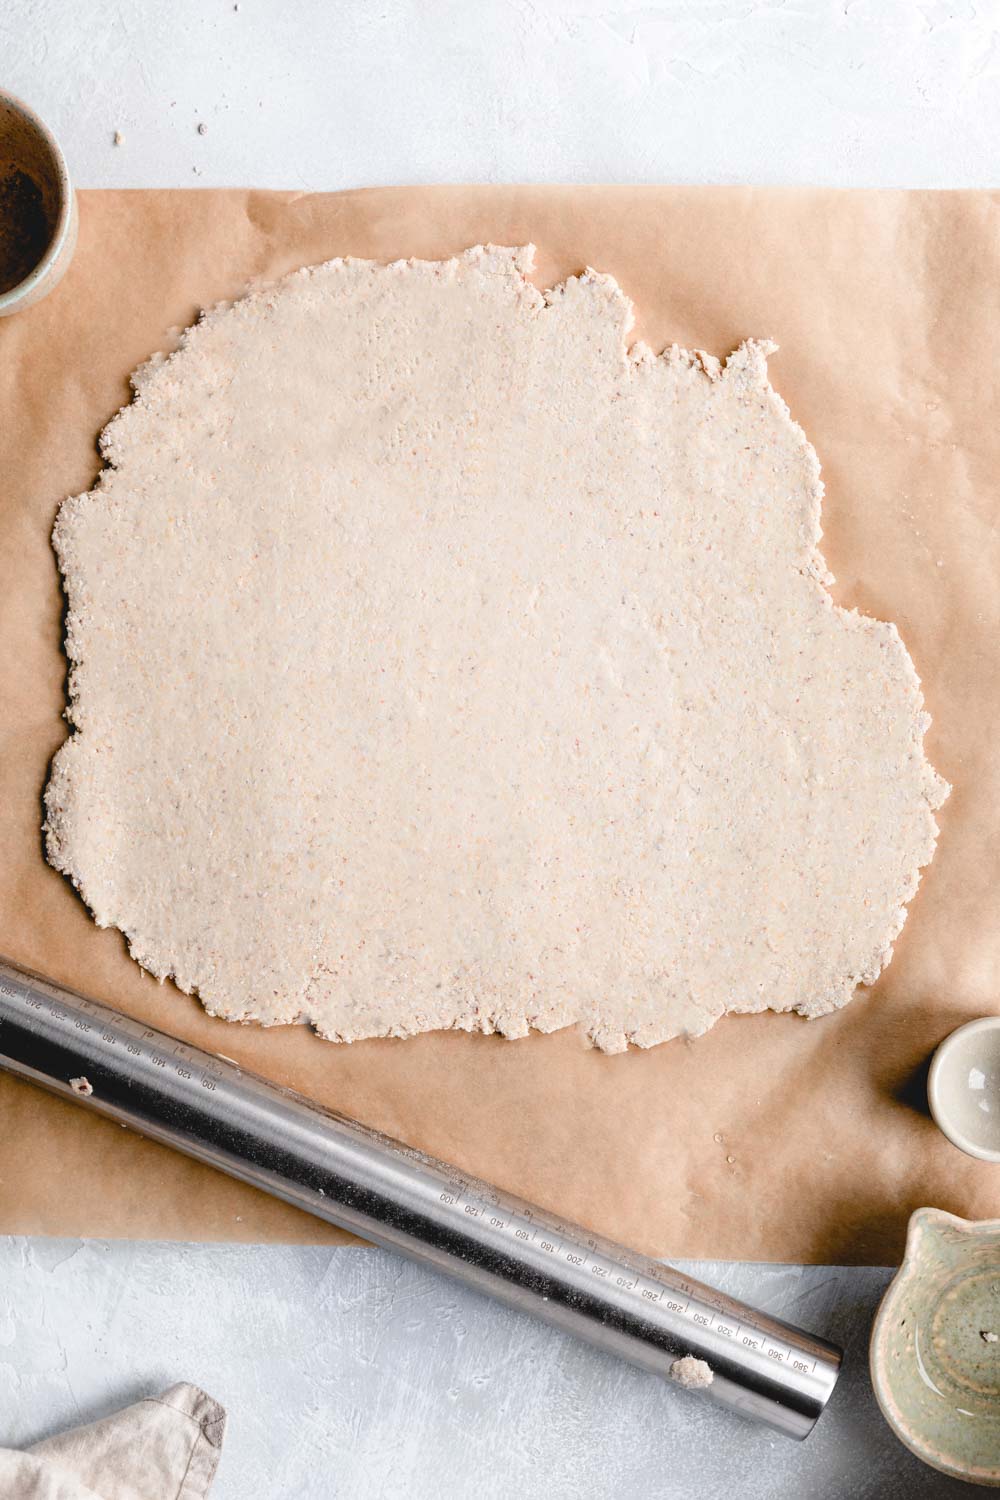 rolled out pie crust dough on brown parchment paper with a silver rolling pin next to it